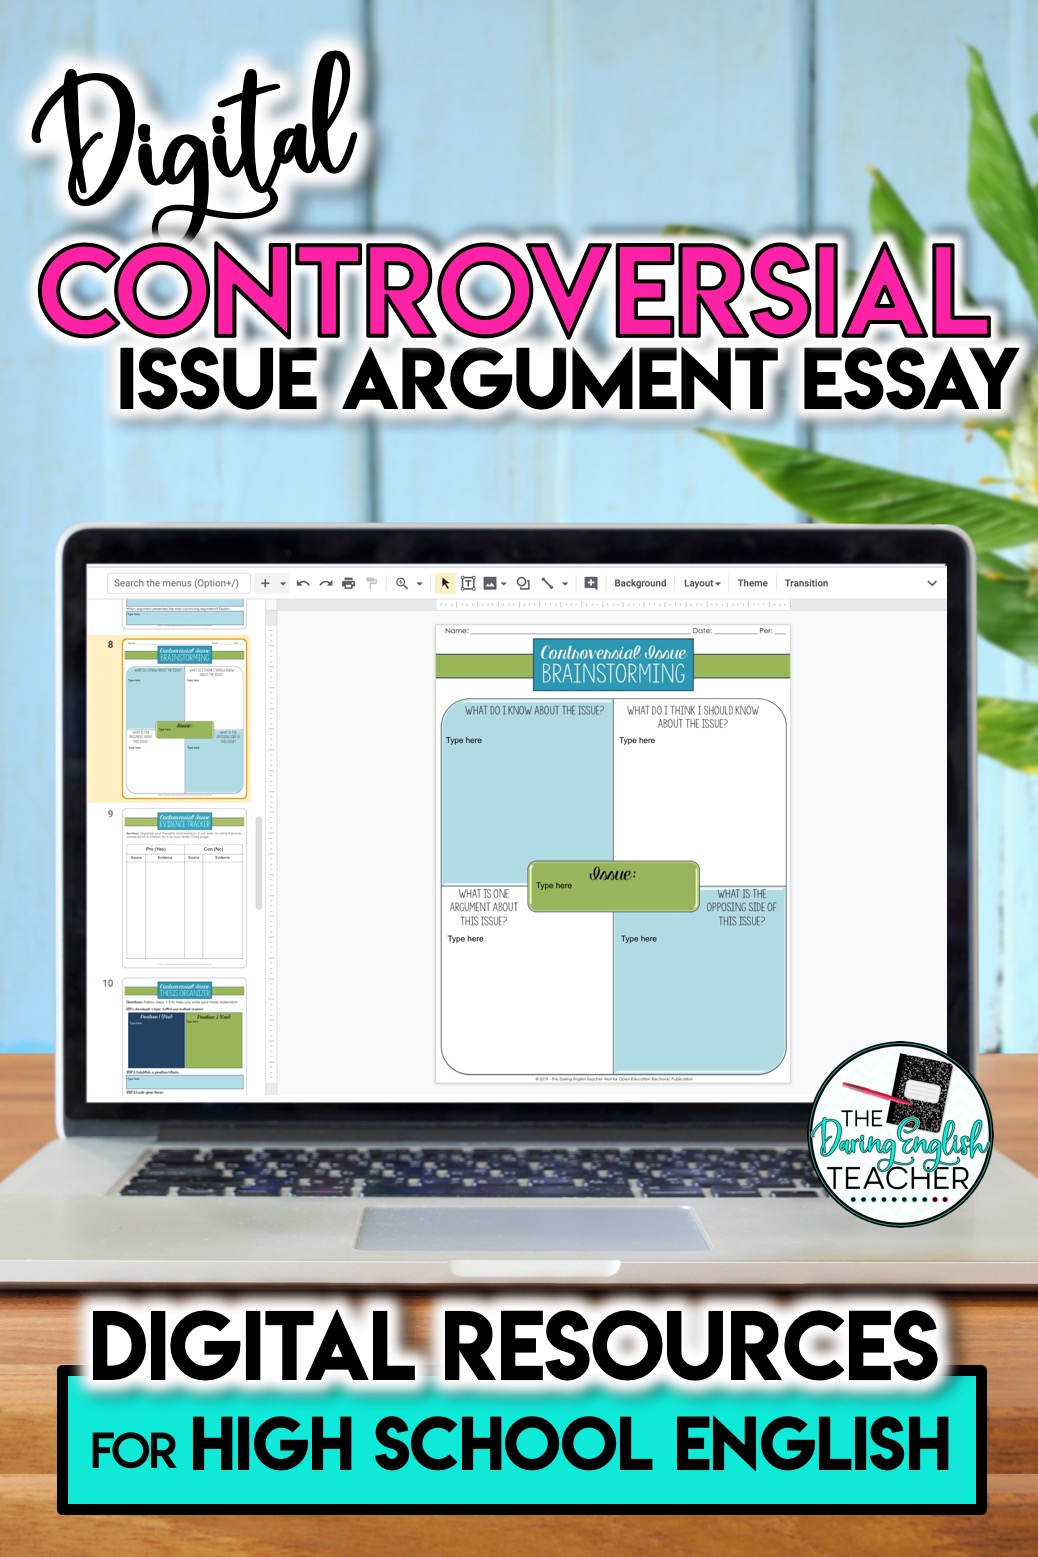 Digital Controversial Issue Argument Essay for High School Englsih